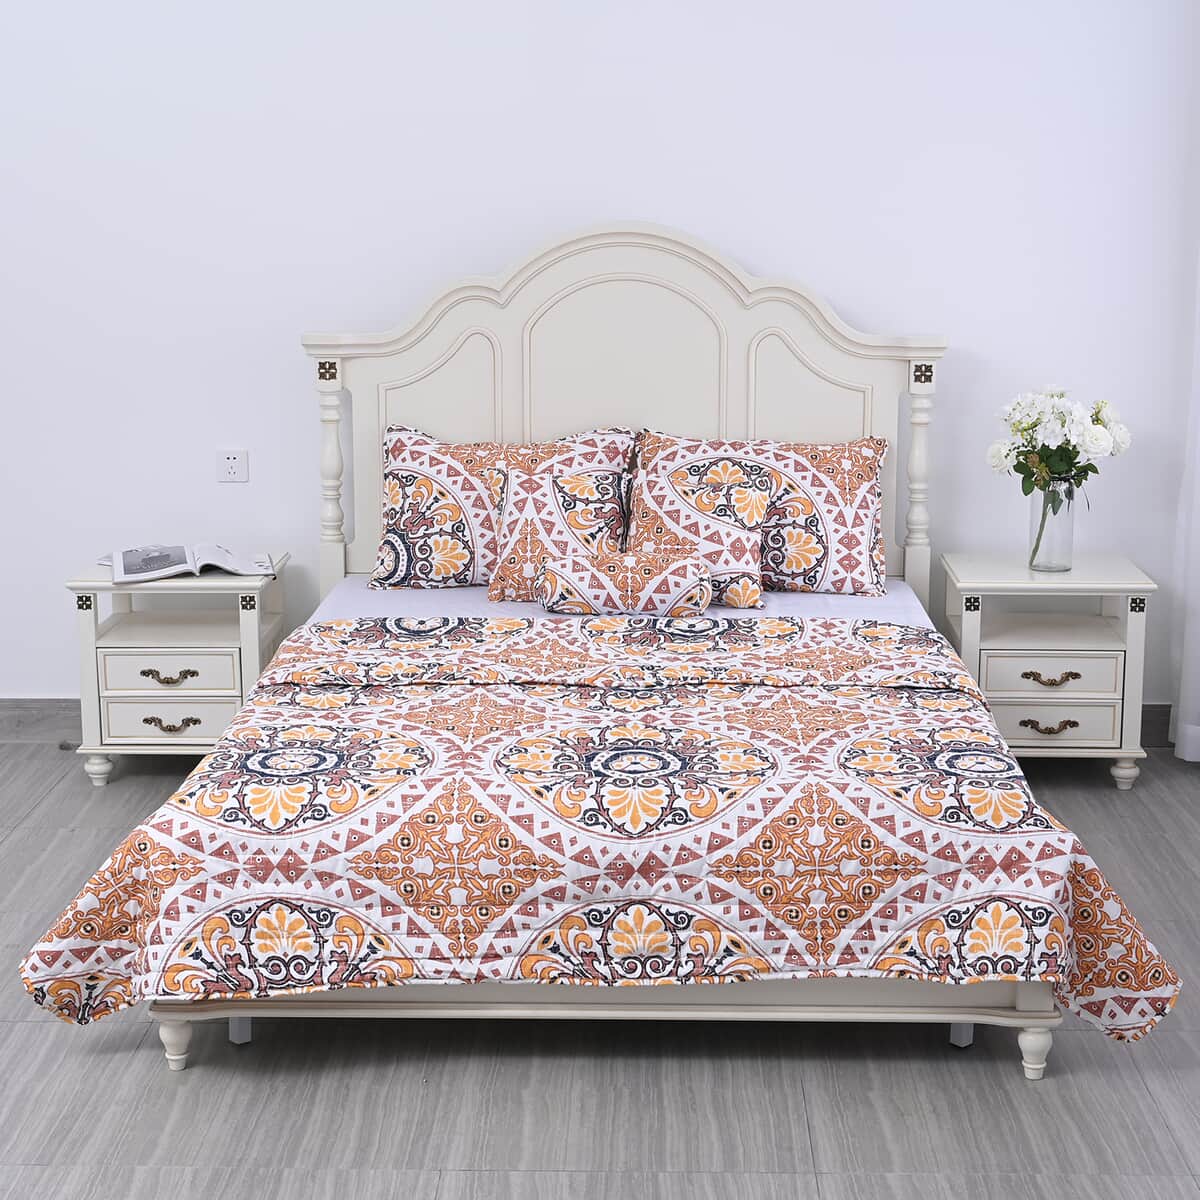 Homesmart Yellow and Brick Flower Printed 6pcs Quilt Set - King (100% Microfiber) image number 1